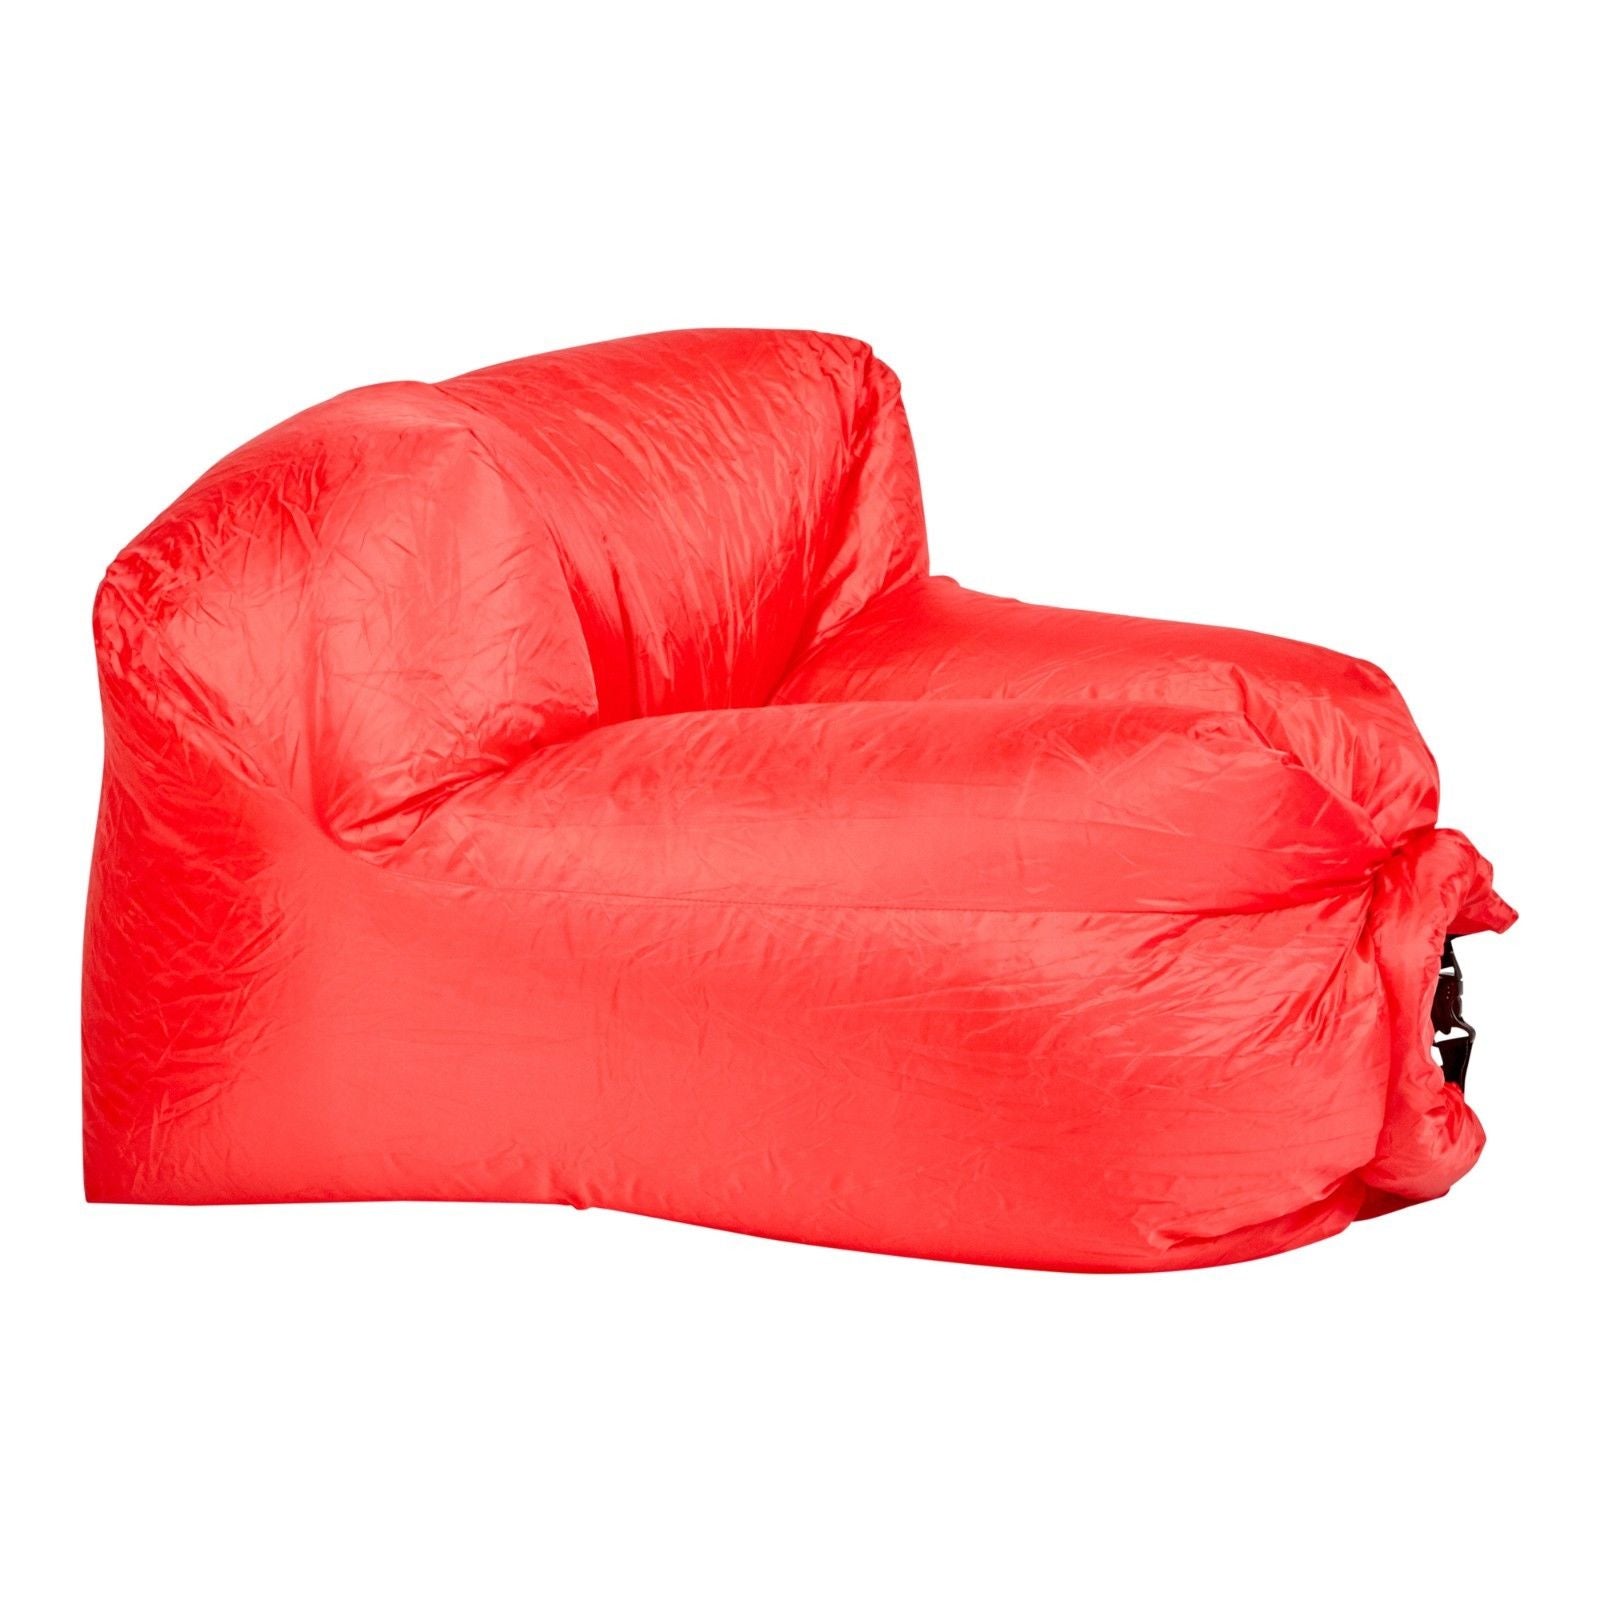 Milano Decor Inflatable Air Lounger for Beach Camping Festival Outdoor Lazy Lounge Chair - Red - SILBERSHELL